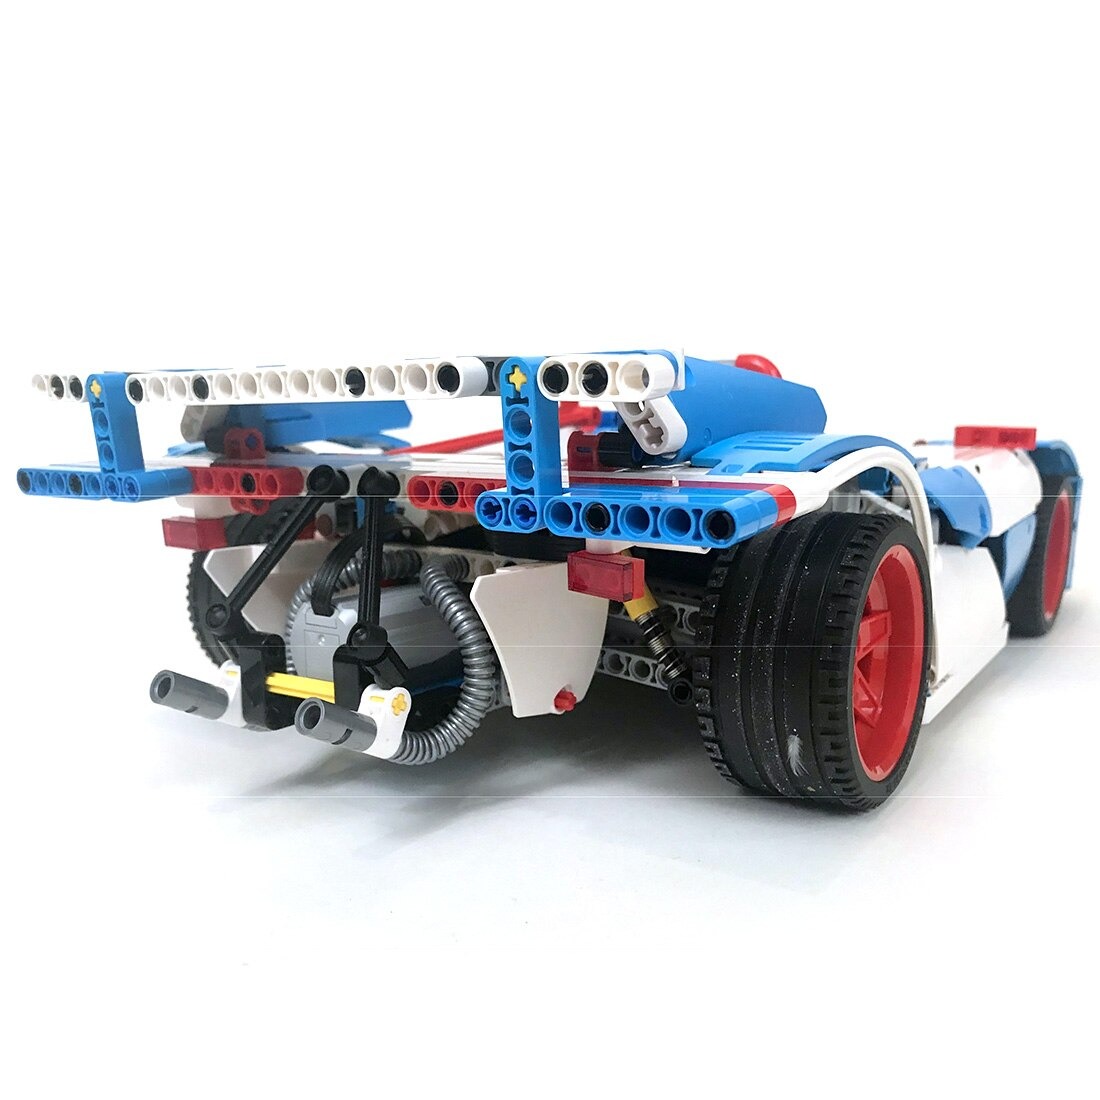 authorized moc 12233 rally car technic m main 1 - MOULD KING